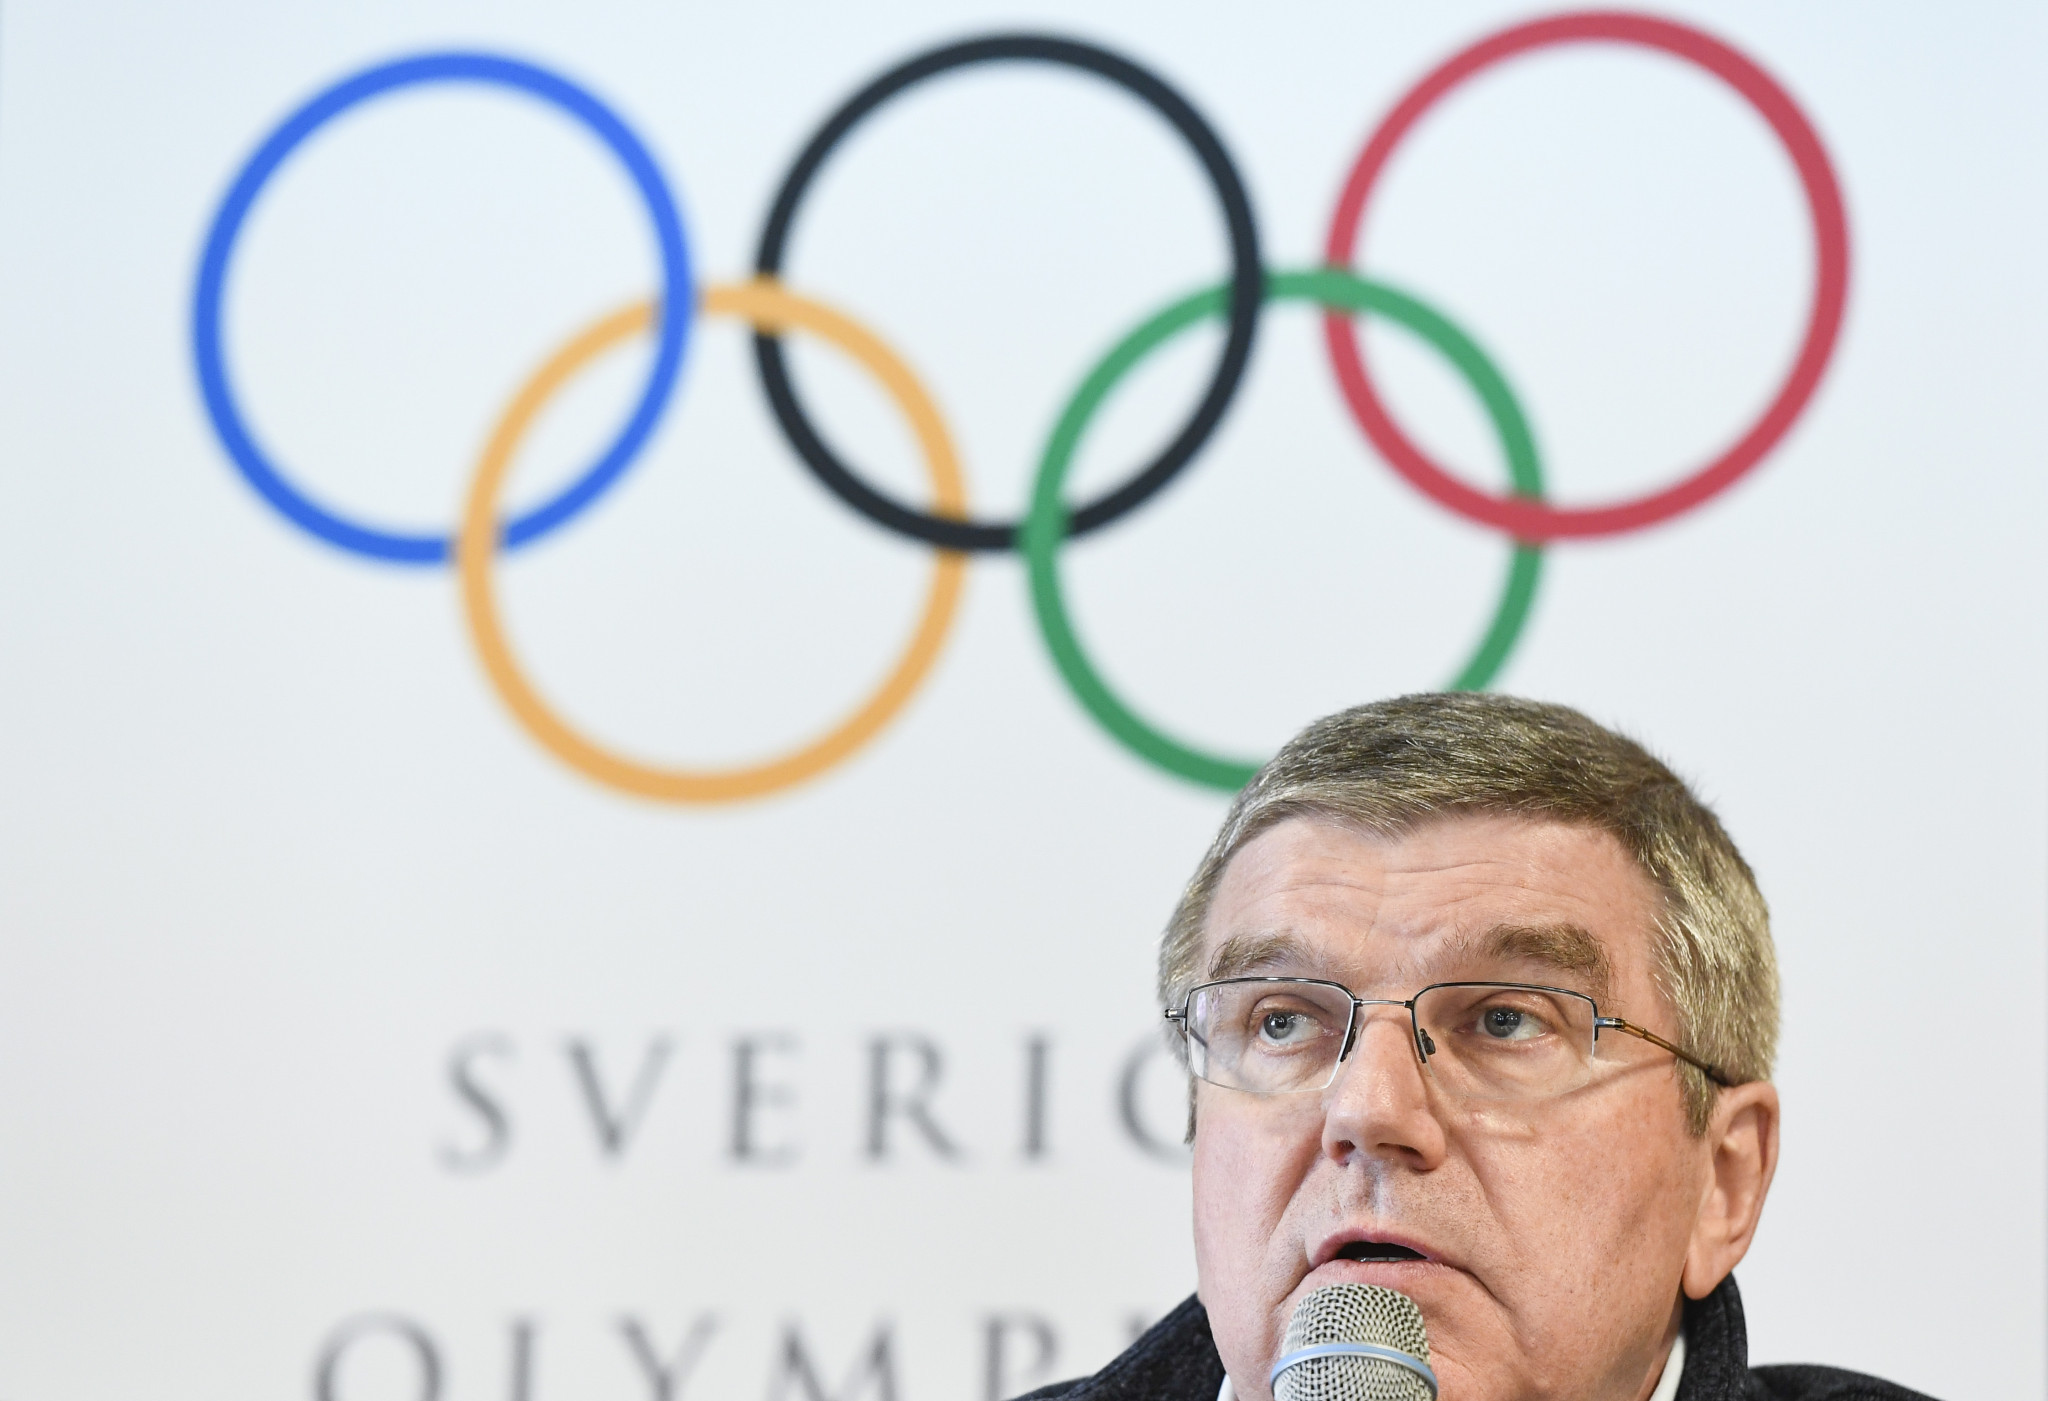 Thomas Bach has reiterated the IOC stance of political neutrality ©Getty Images